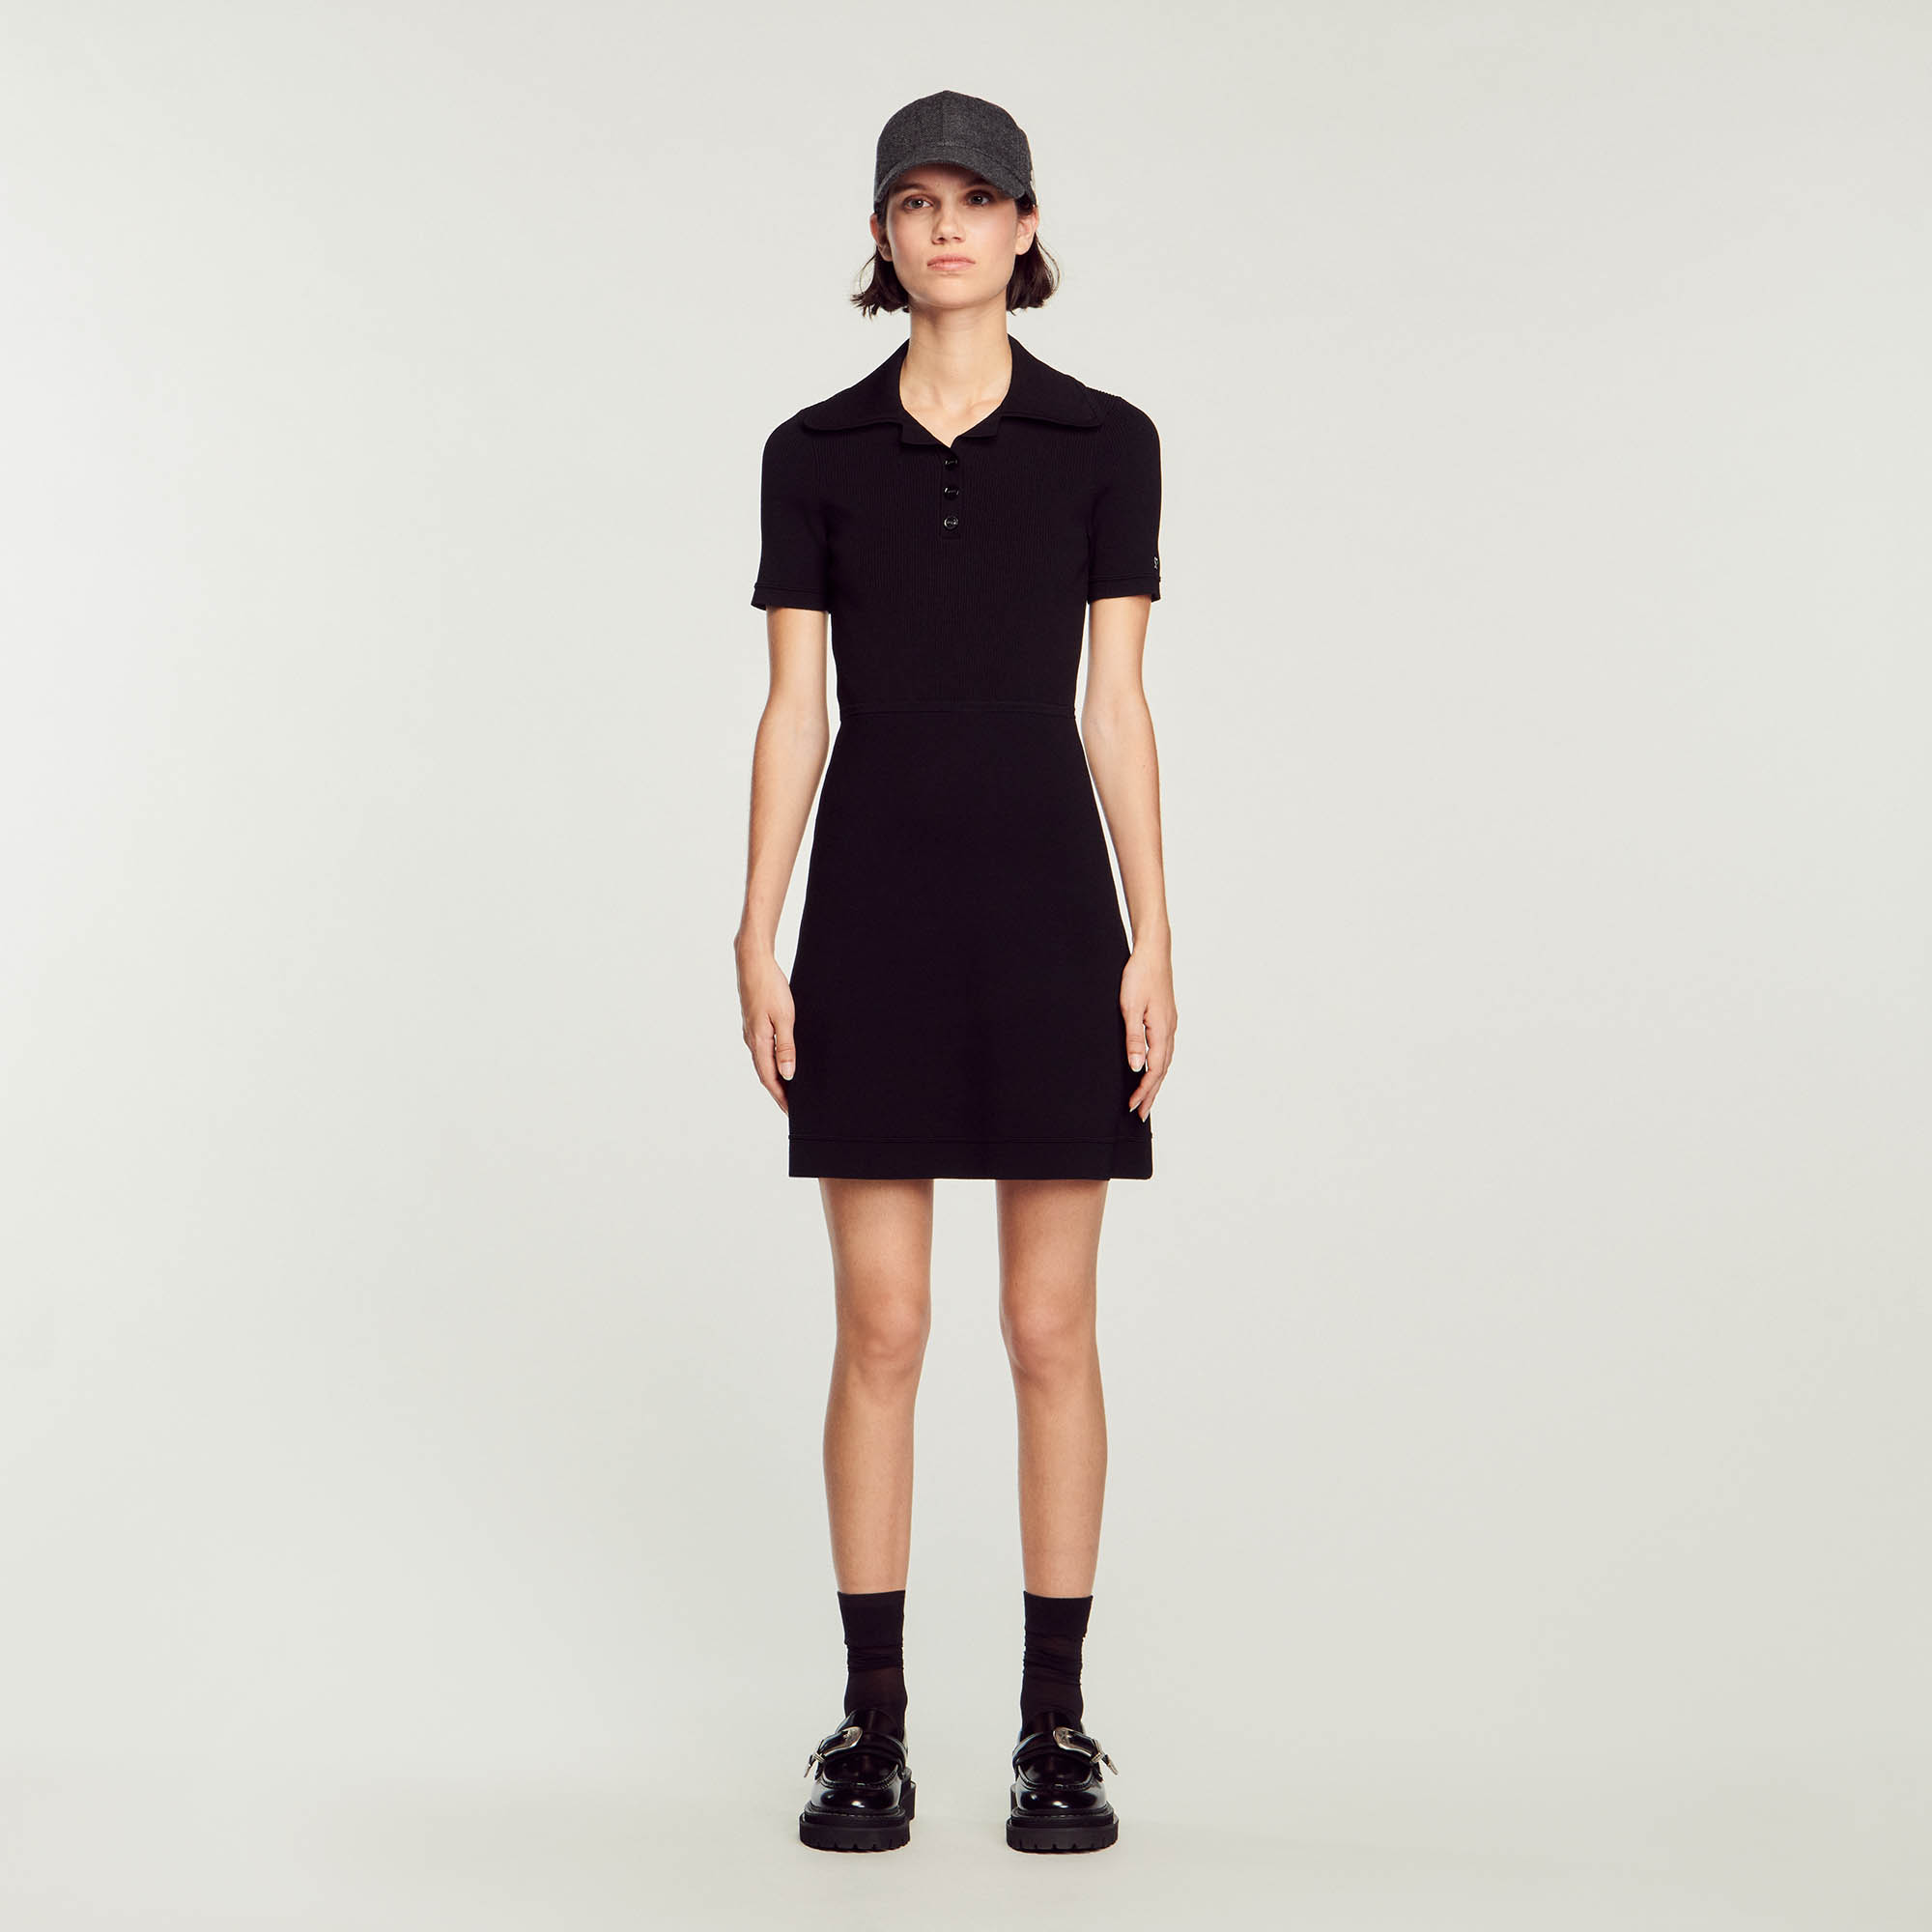 Sandro viscose Ribbed knit midi dress with a 3-button polo neck, short sleeves, and a flared skirt